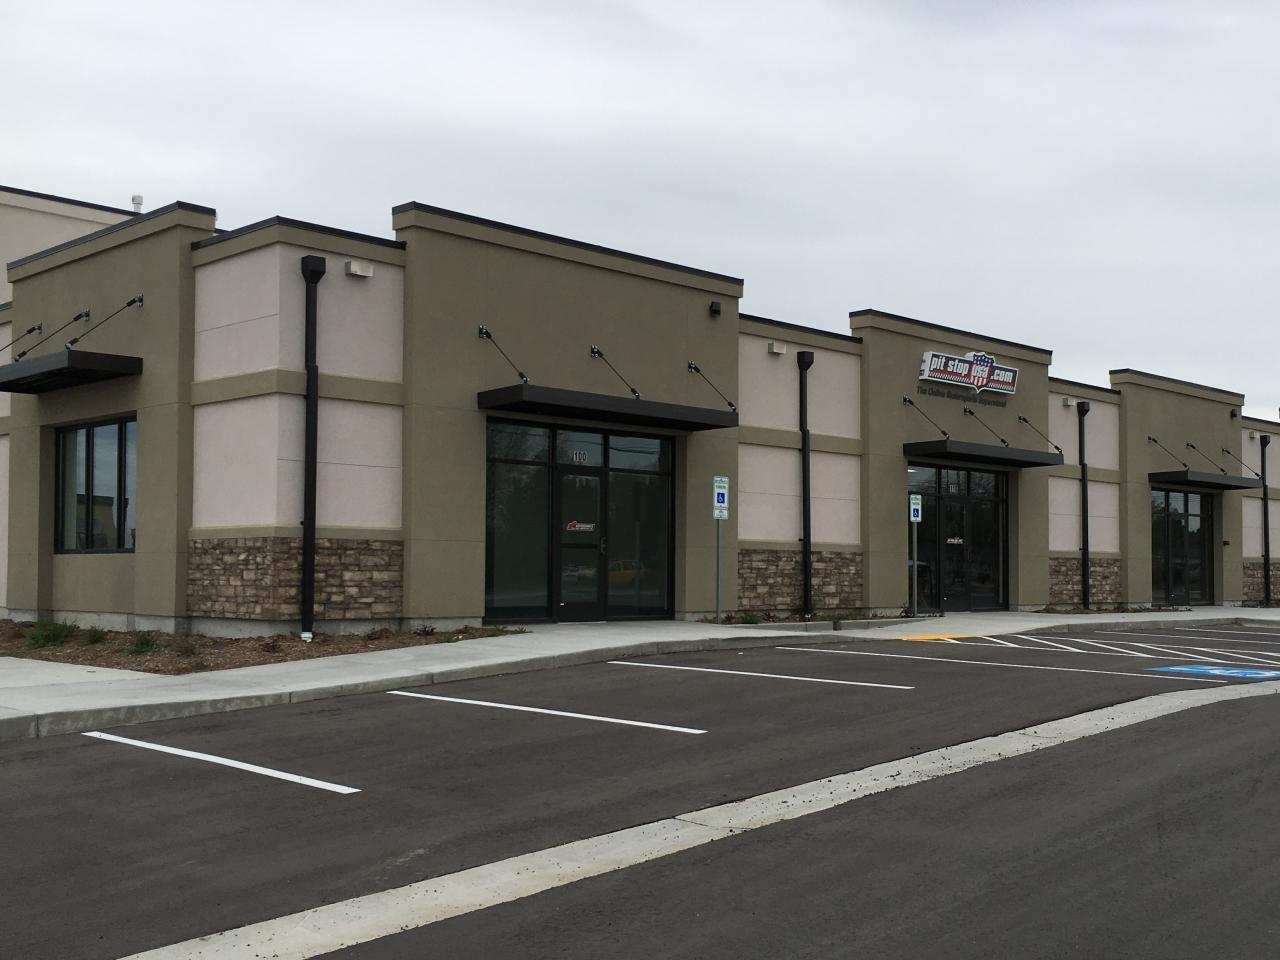 Performance Sales and Marketing Corporate Office and Retail Showroom in Meridian, Idaho.